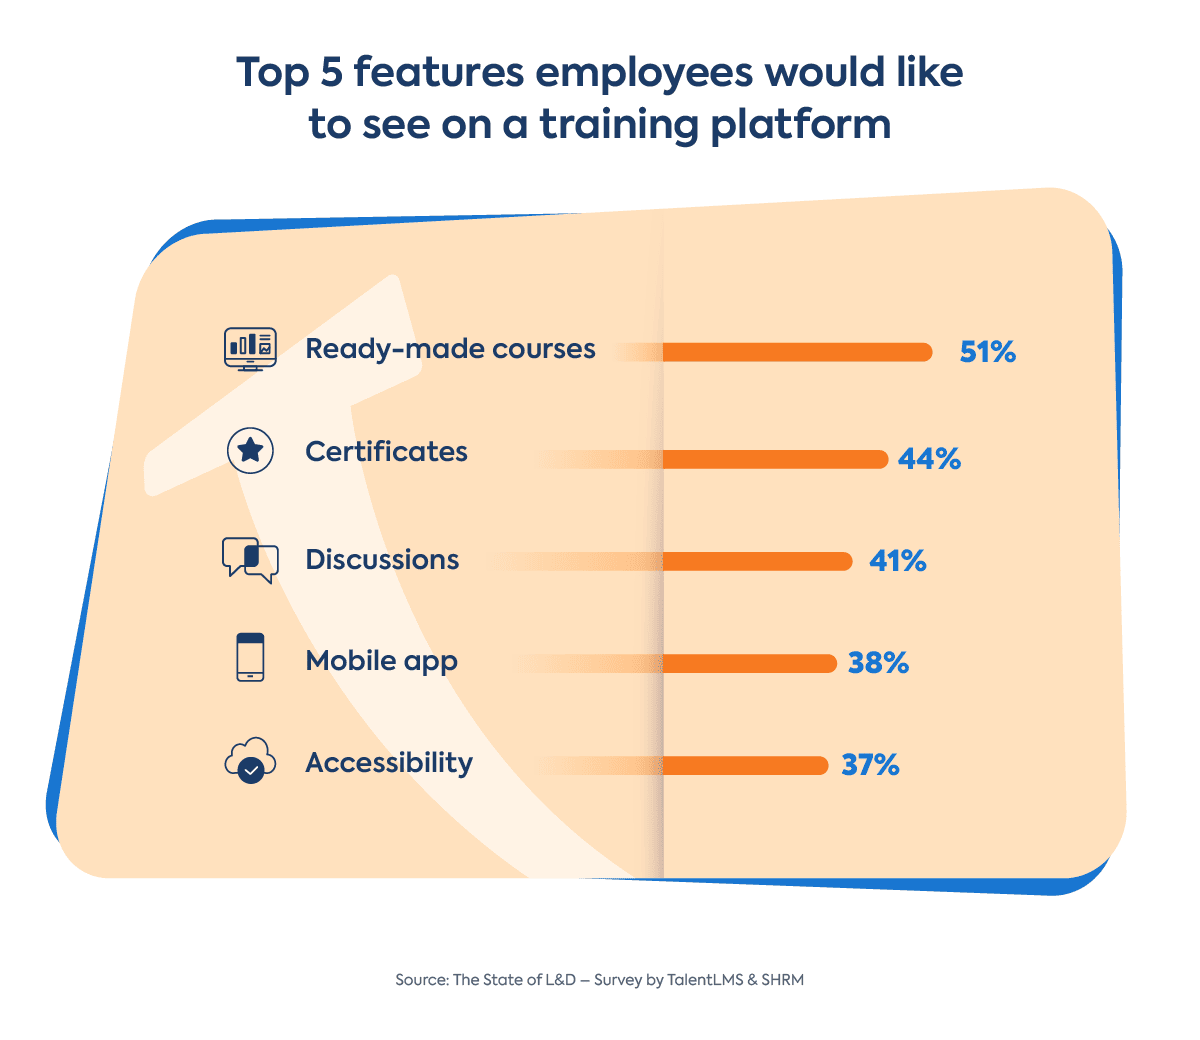 Training platform features that employees want